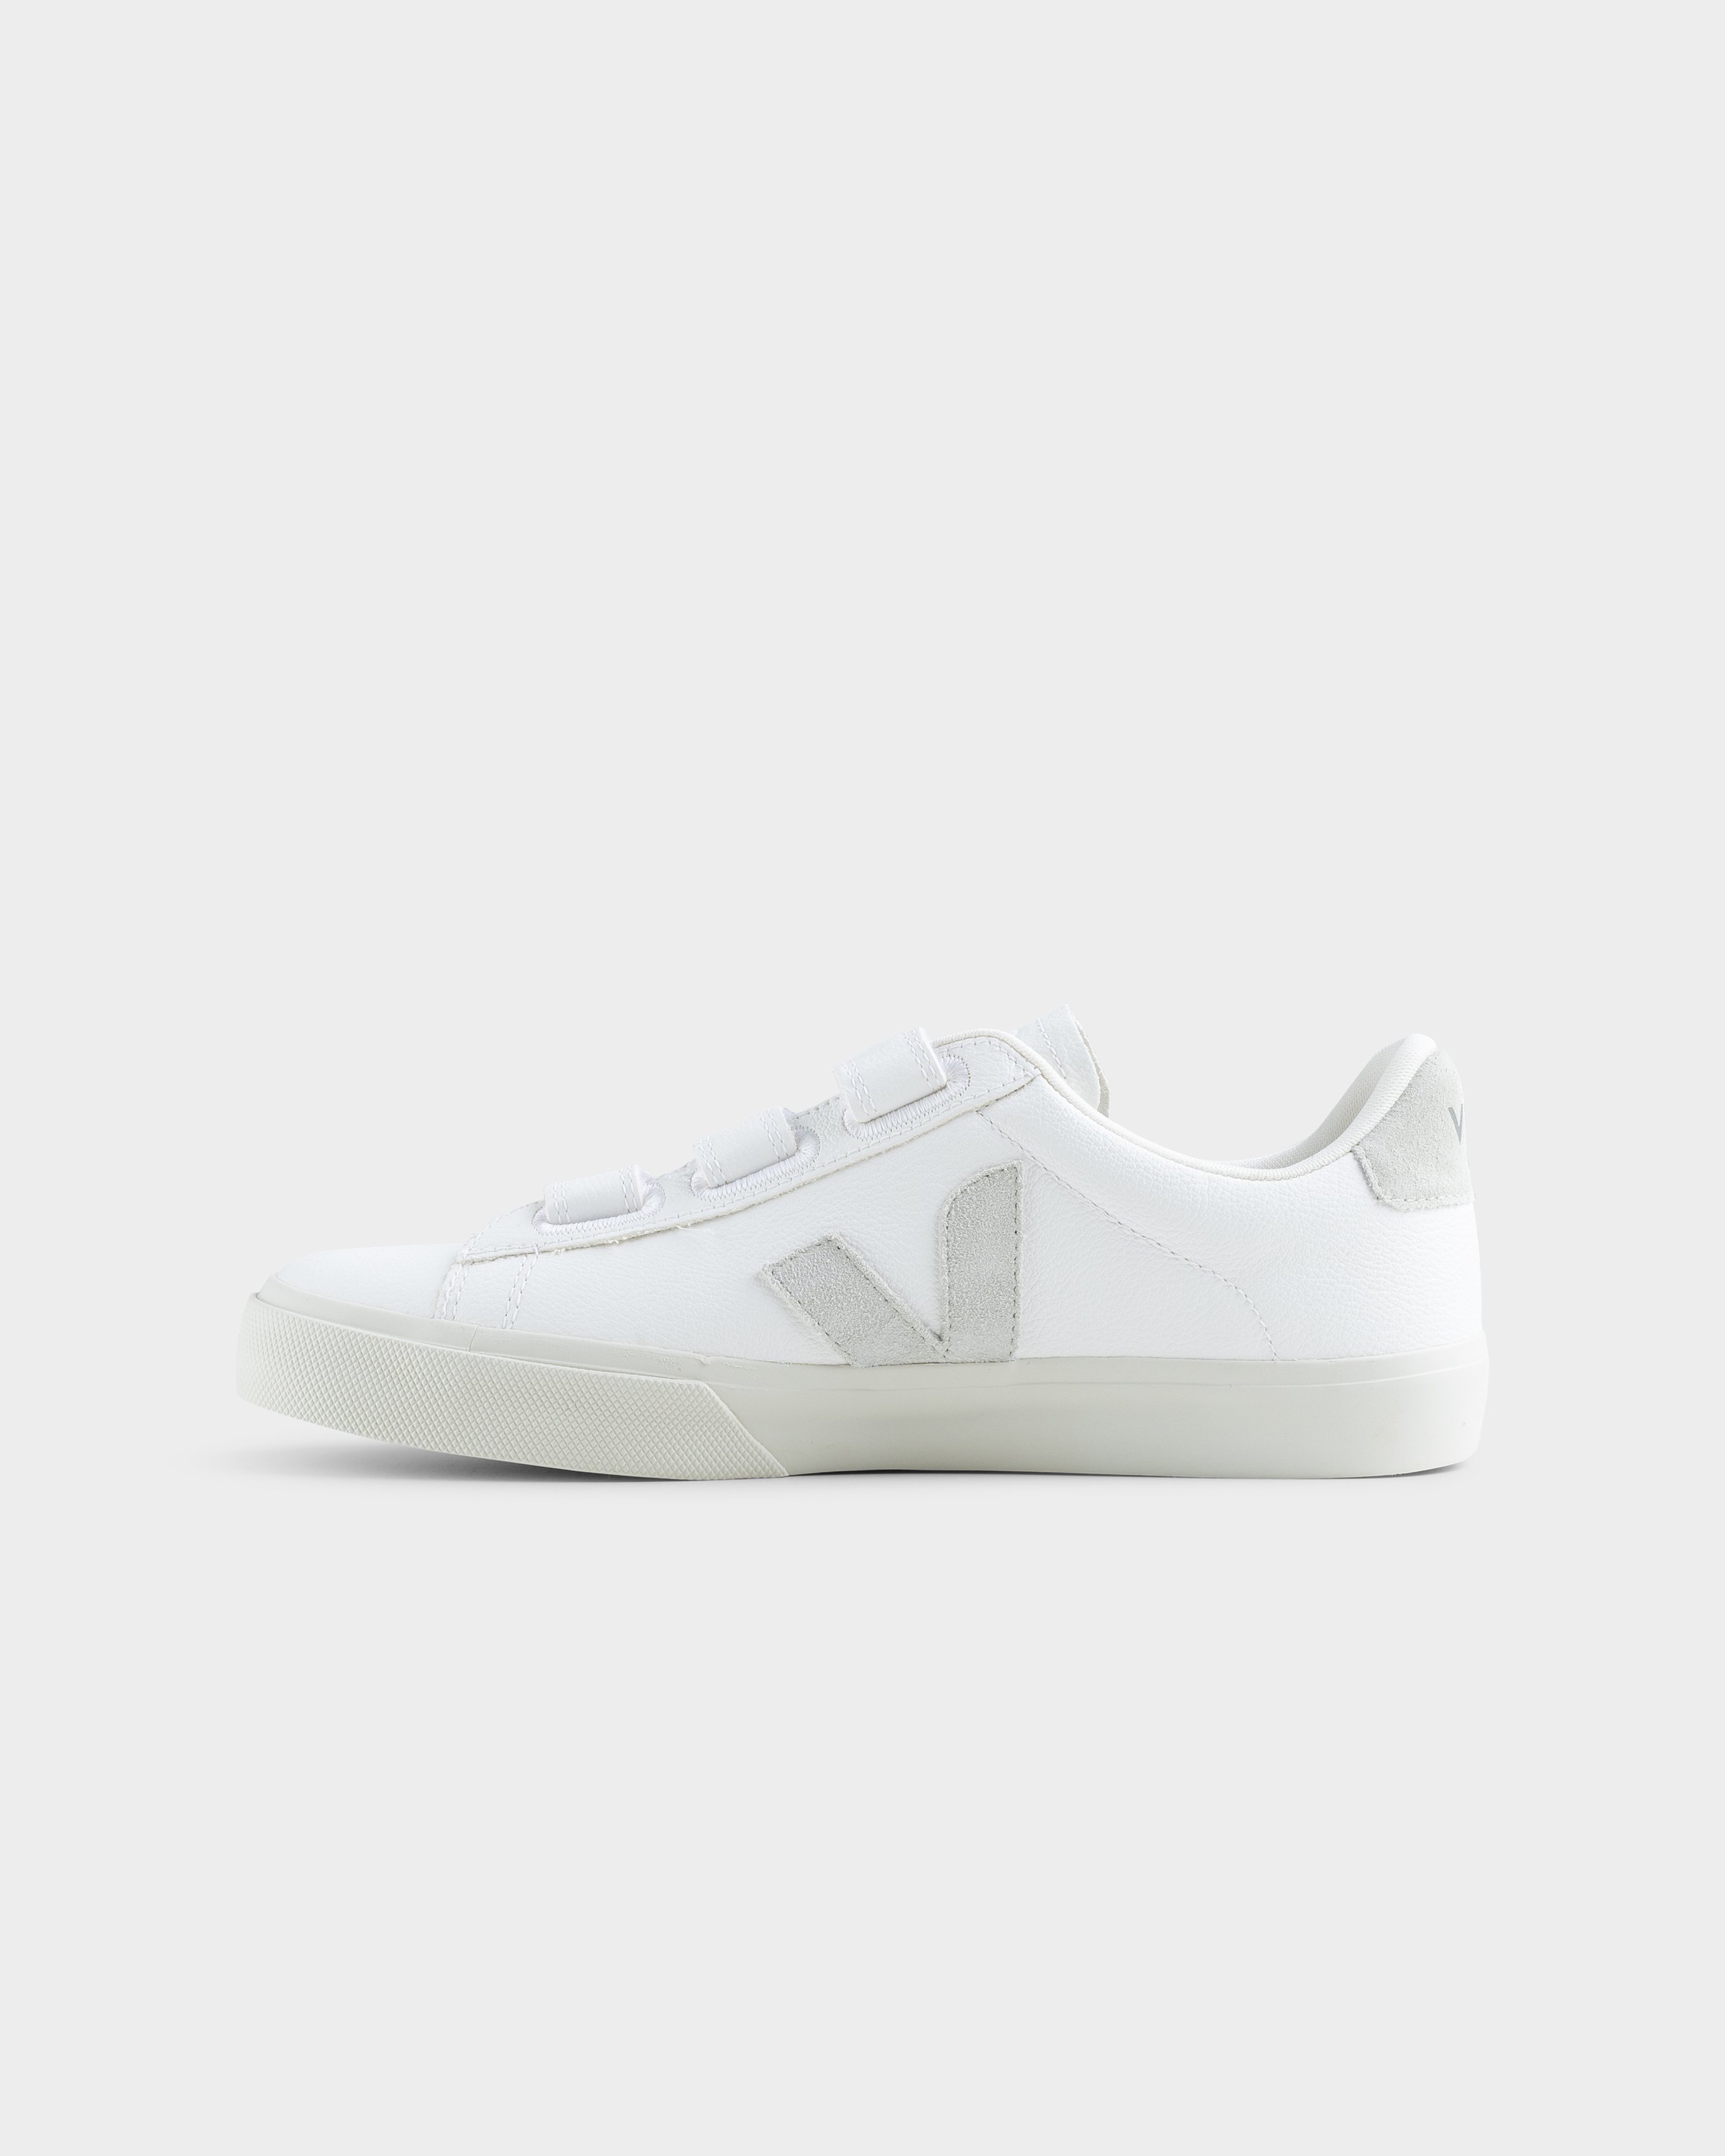 VEJA - Recife Chrome-Free Leather White/Natural - Footwear - White - Image 2